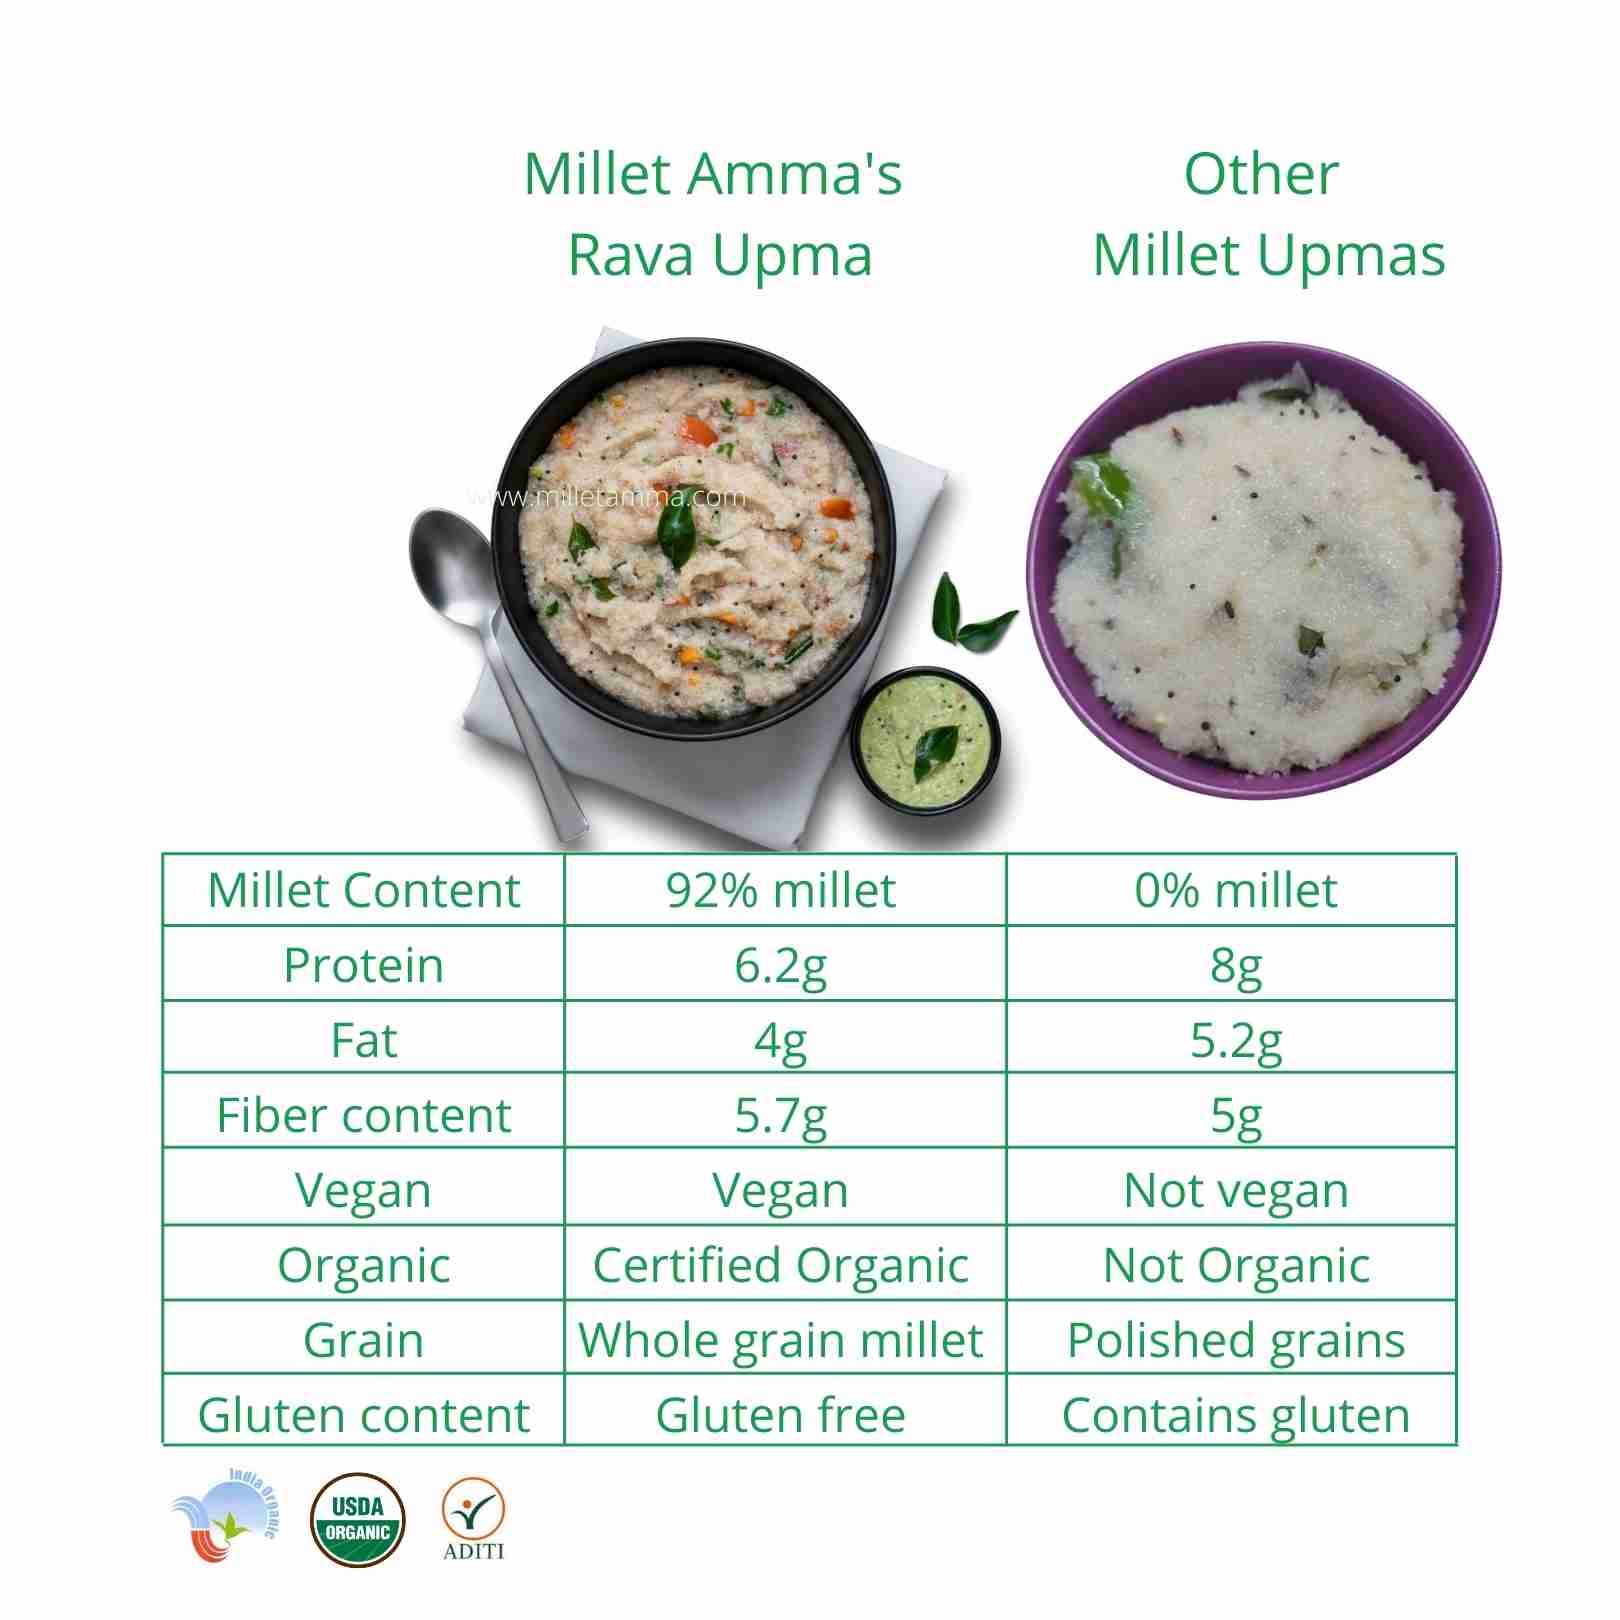 Millet Amma’s Organic Millet Rava Idli Mix- There’s nothing like Yummy Rava Idlis for breakfast.  Our Gluten-free Millet Rava Idli Mix is a nutritious and healthy breakfast full of calcium and magnesium.  Millet Amma’s Rava Idlis have a relatively low glycemic index and are a great replacement to rice idlis.